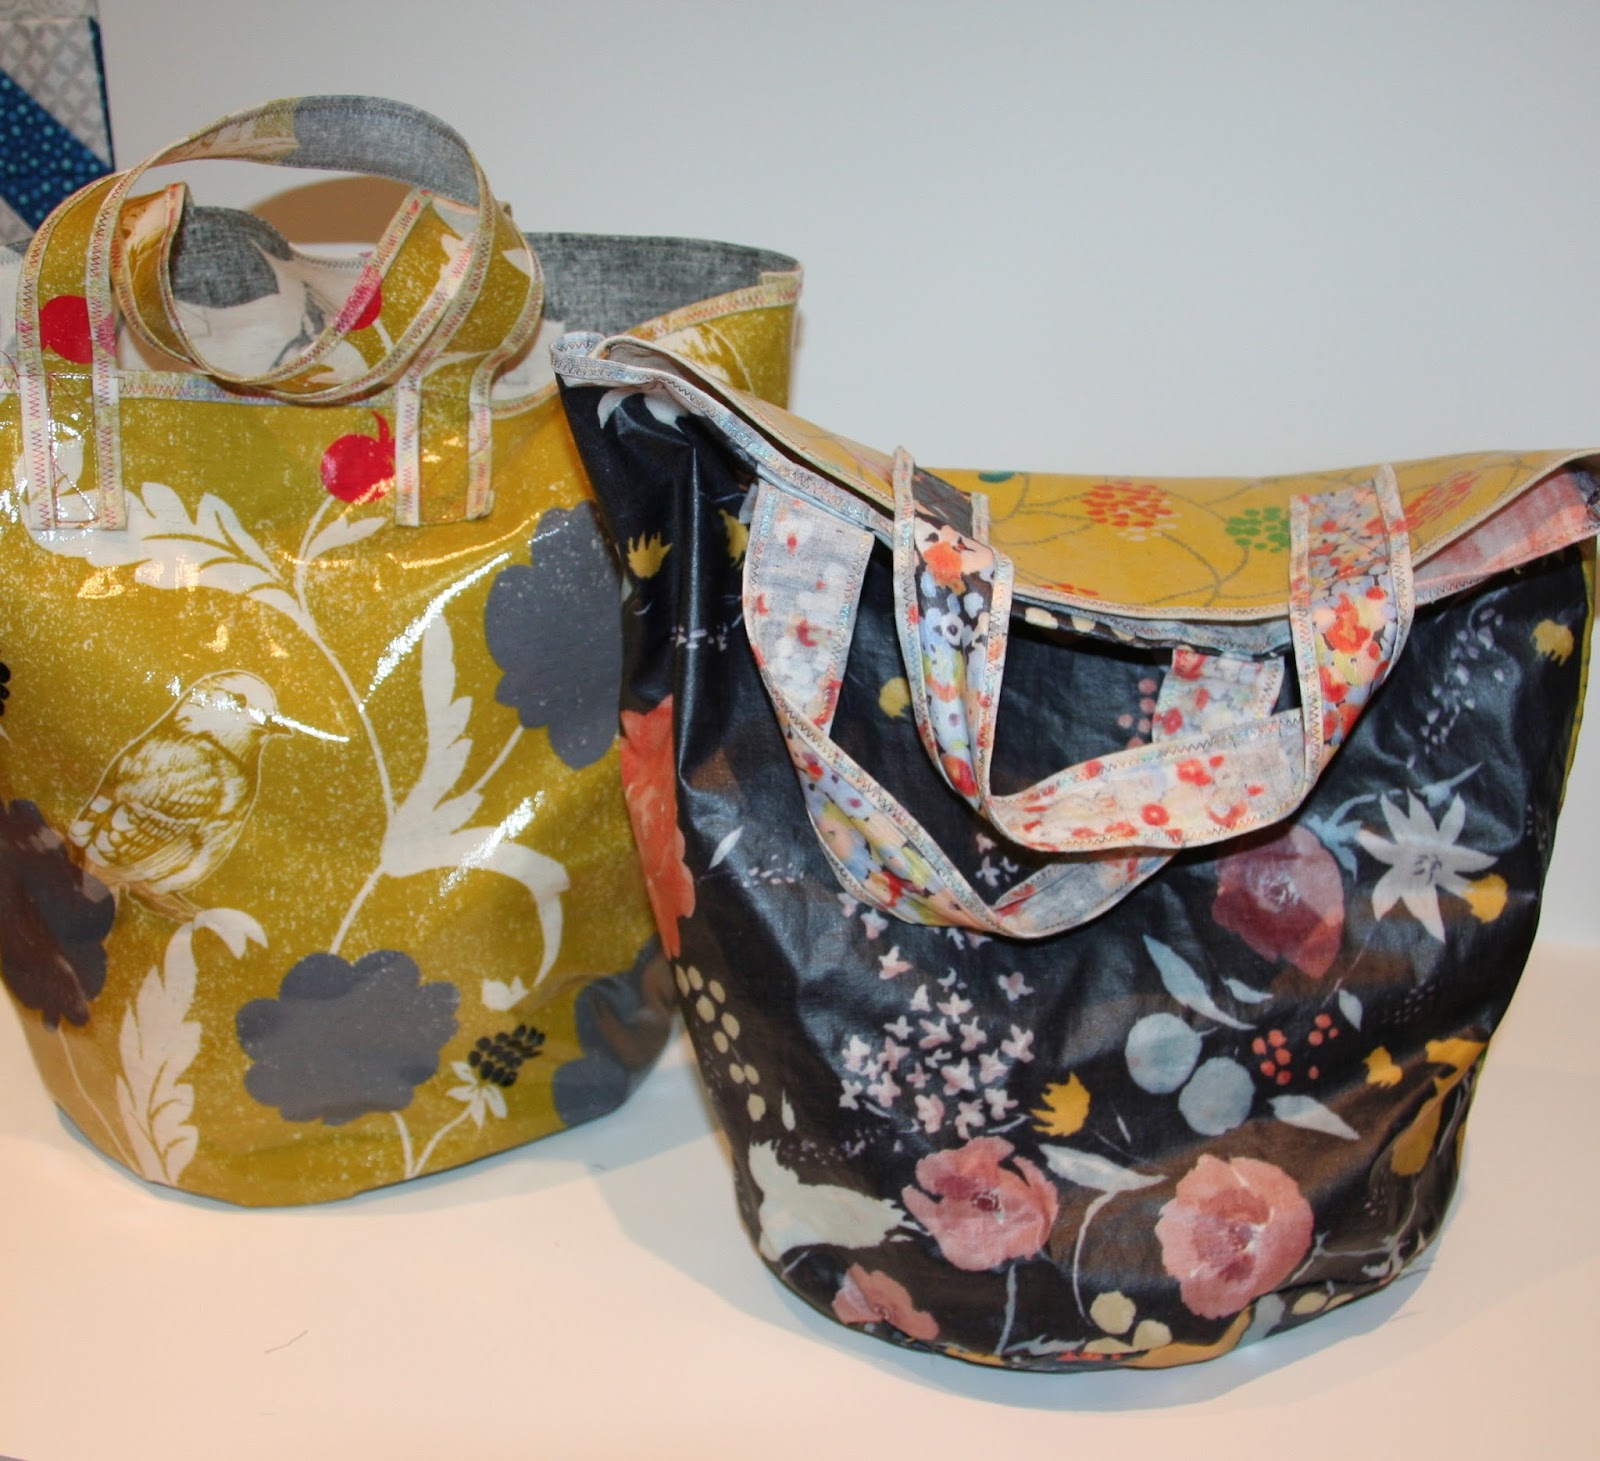 Fairly Merry: Oilcloth Tote